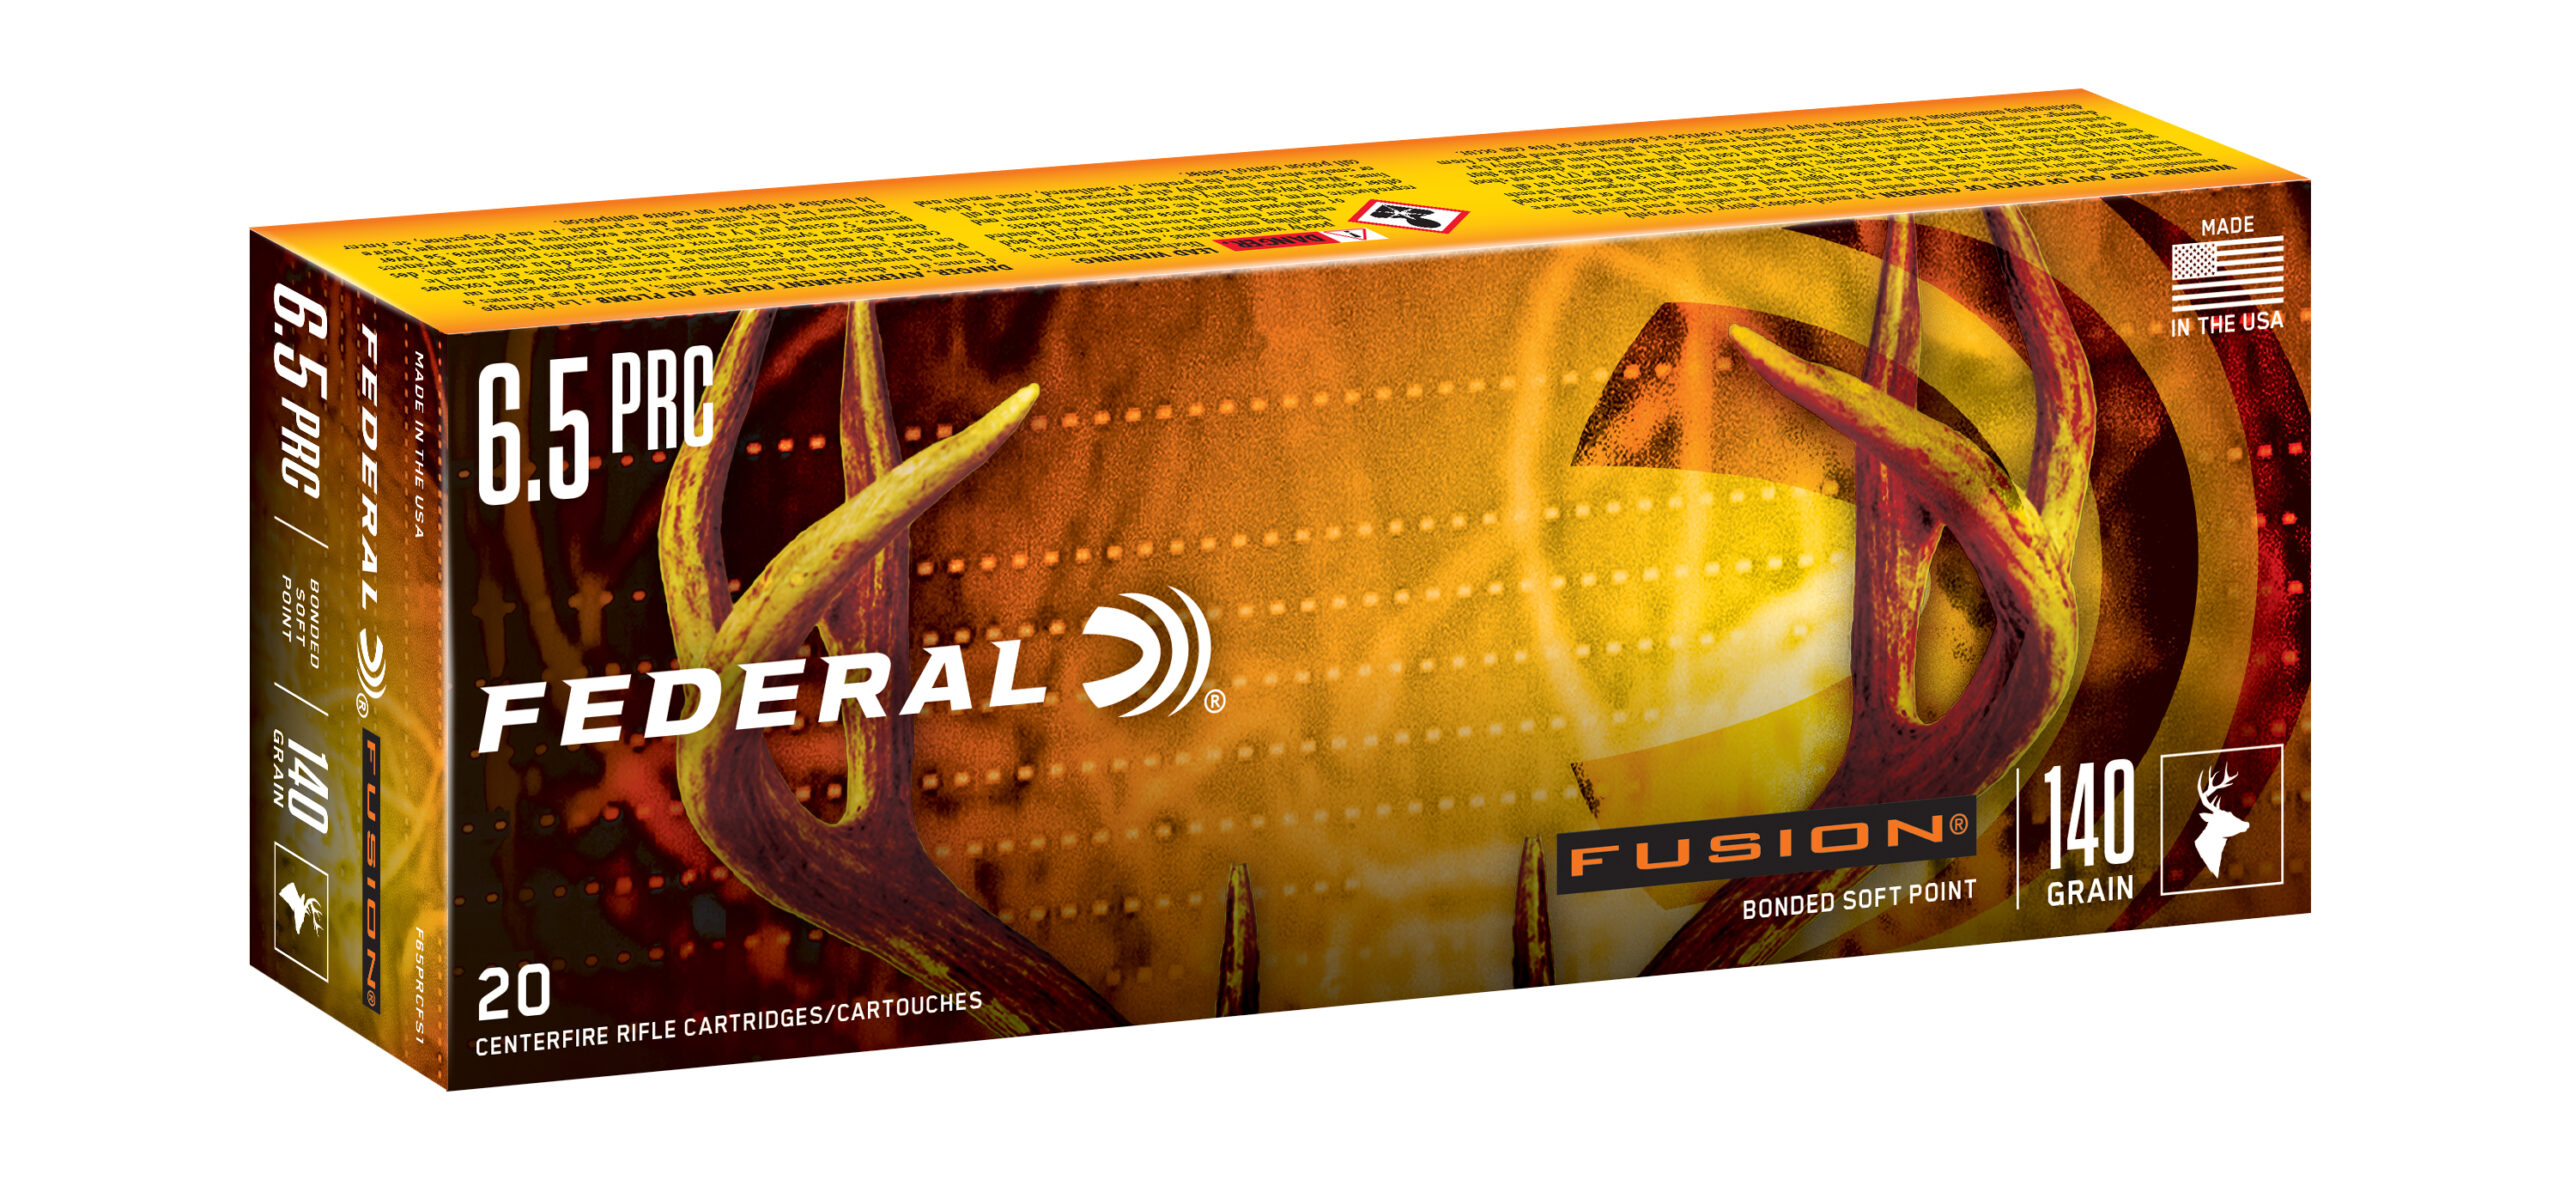 New rifle ammo from Federal Fusion line in 6.5 PRC 140-grain.